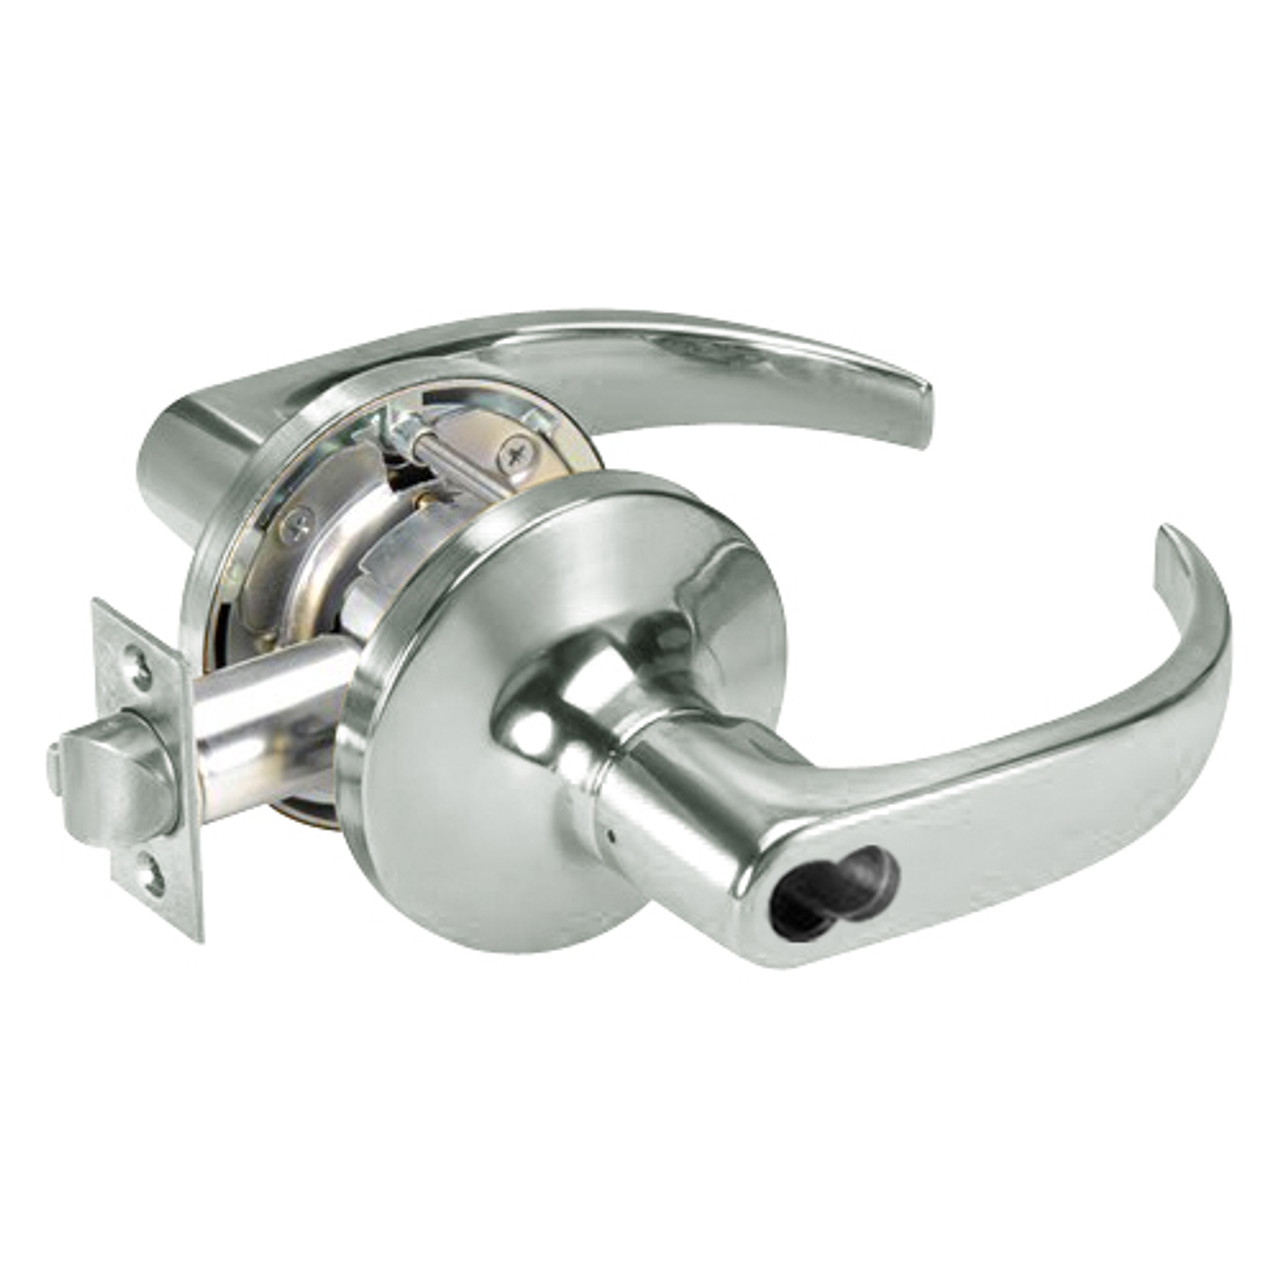 B-PB5404LN-619 Yale 5400LN Series Single Cylinder Entry Cylindrical Locks with Pacific Beach Lever Prepped for SFIC in Satin Nickel